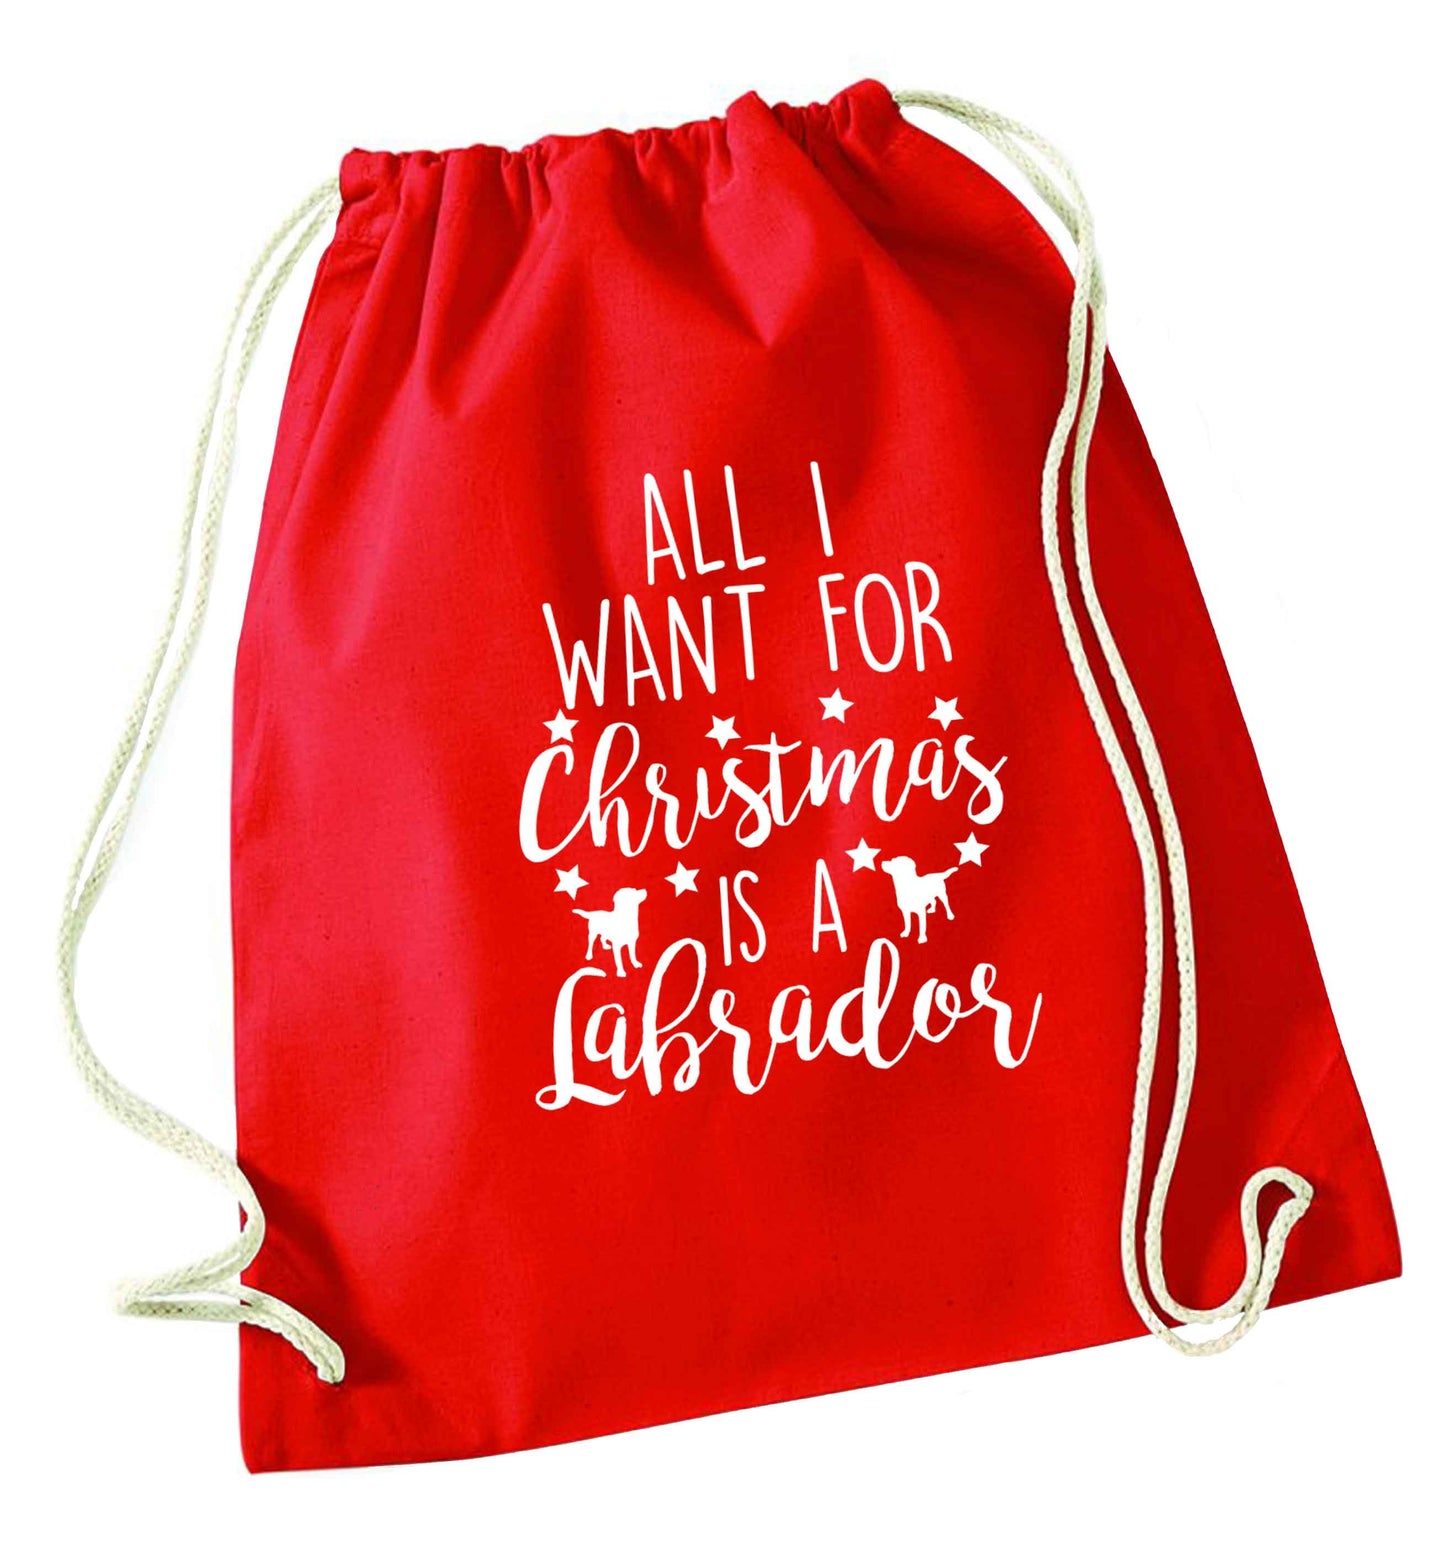 All I want for Christmas is a labrador red drawstring bag 